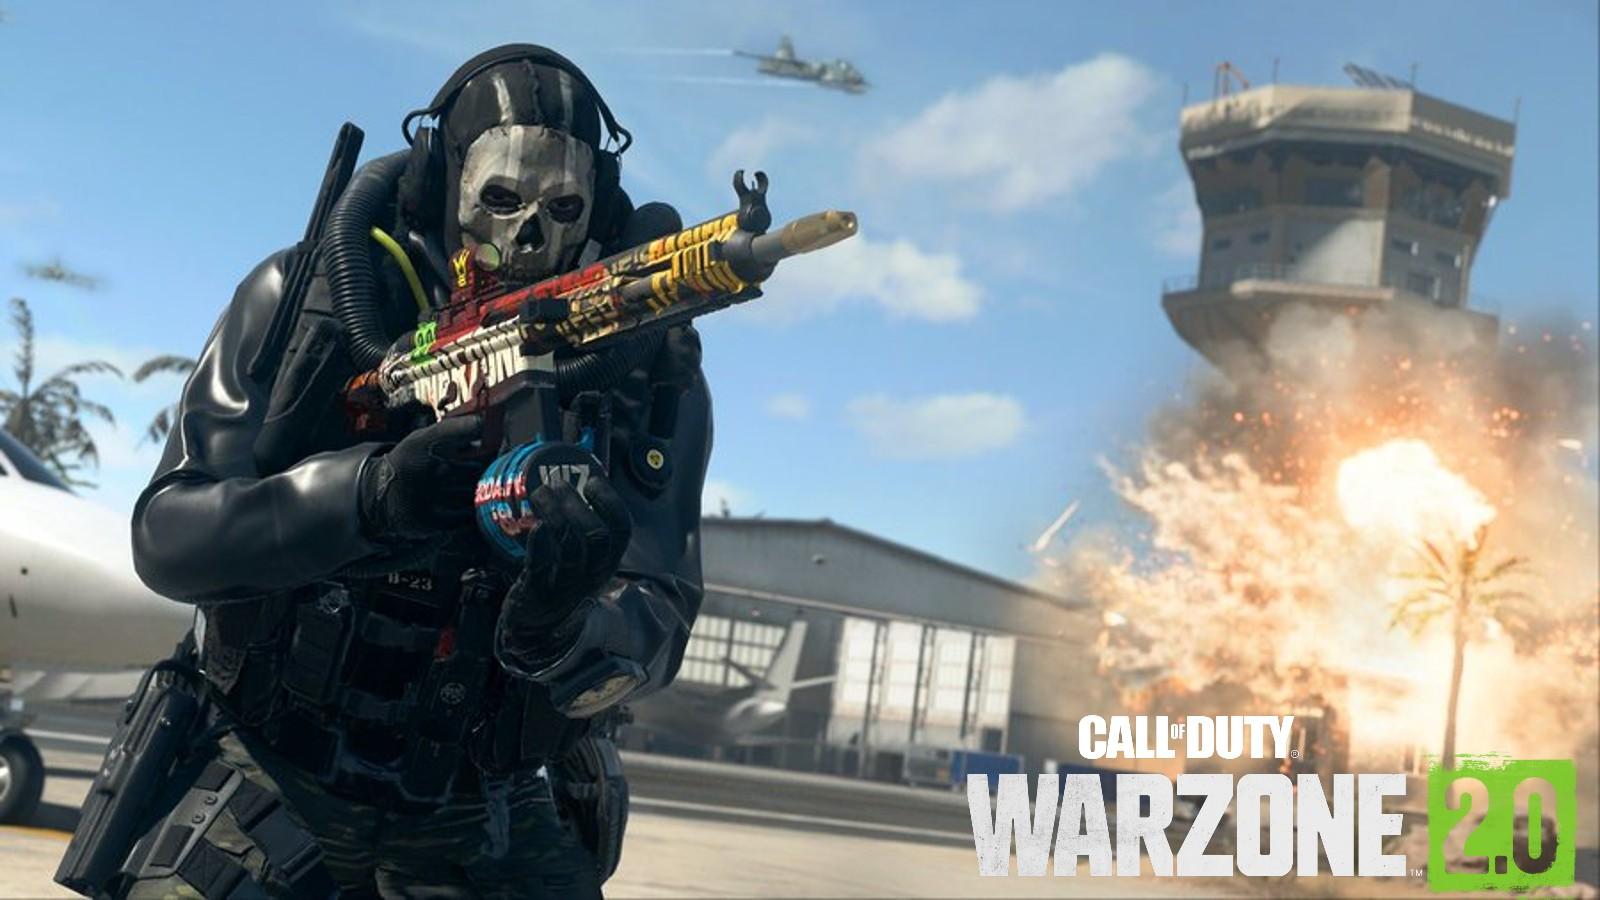 How to download Call of Duty MODERN WARFARE 2/ Warzone 2.0 for FREE.